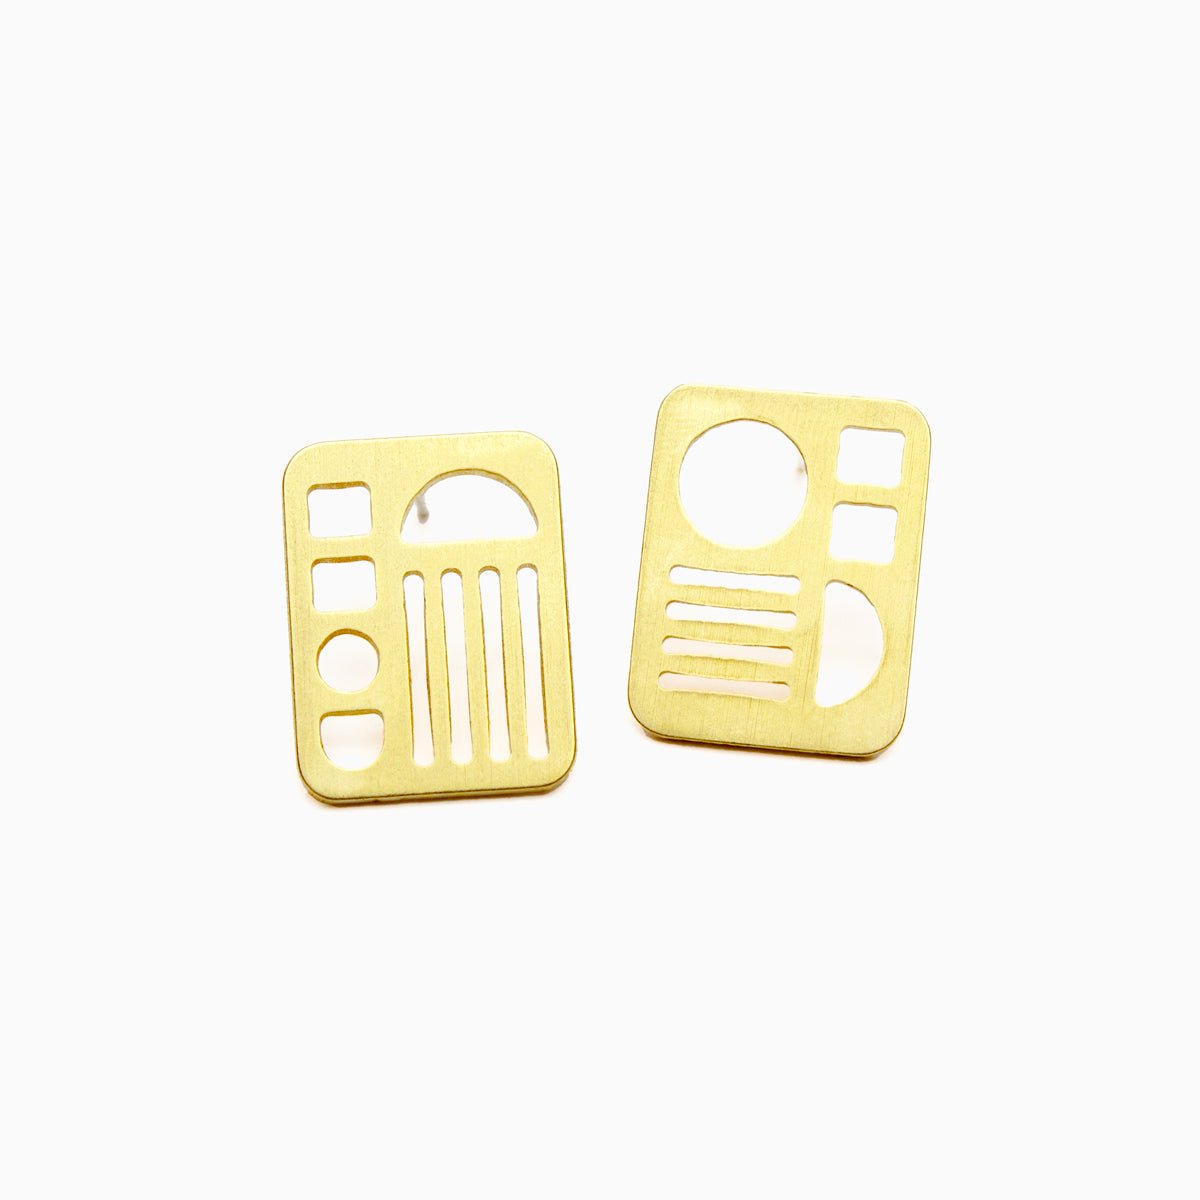 A small brass rectangular stud earring with  circles, lines, squares and half moon cut outs. Designed and handcrafted in Portland, Oregon.